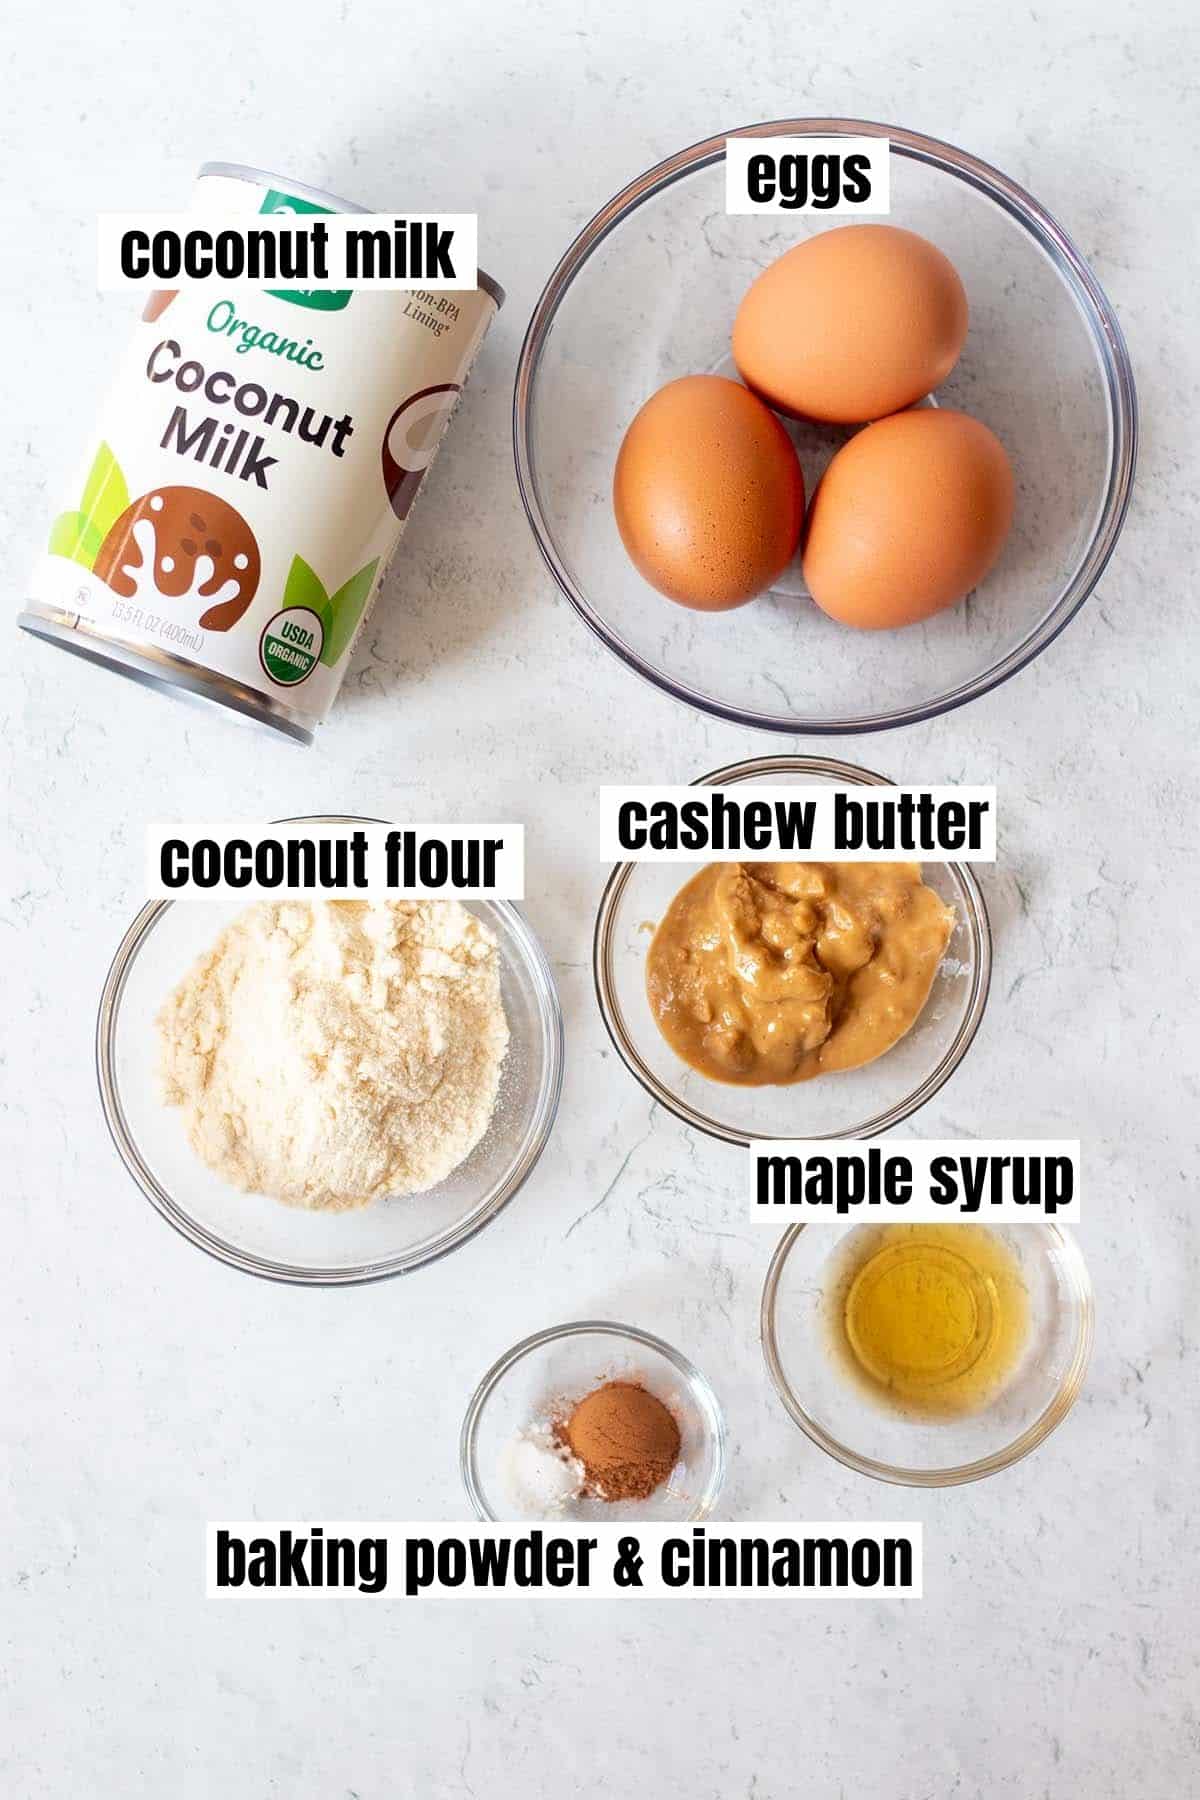 ingredients in coconut flour pancakes which include coconut milk, eggs, coconut flour, nut butter, maple syrup, baking powder and cinnamon.